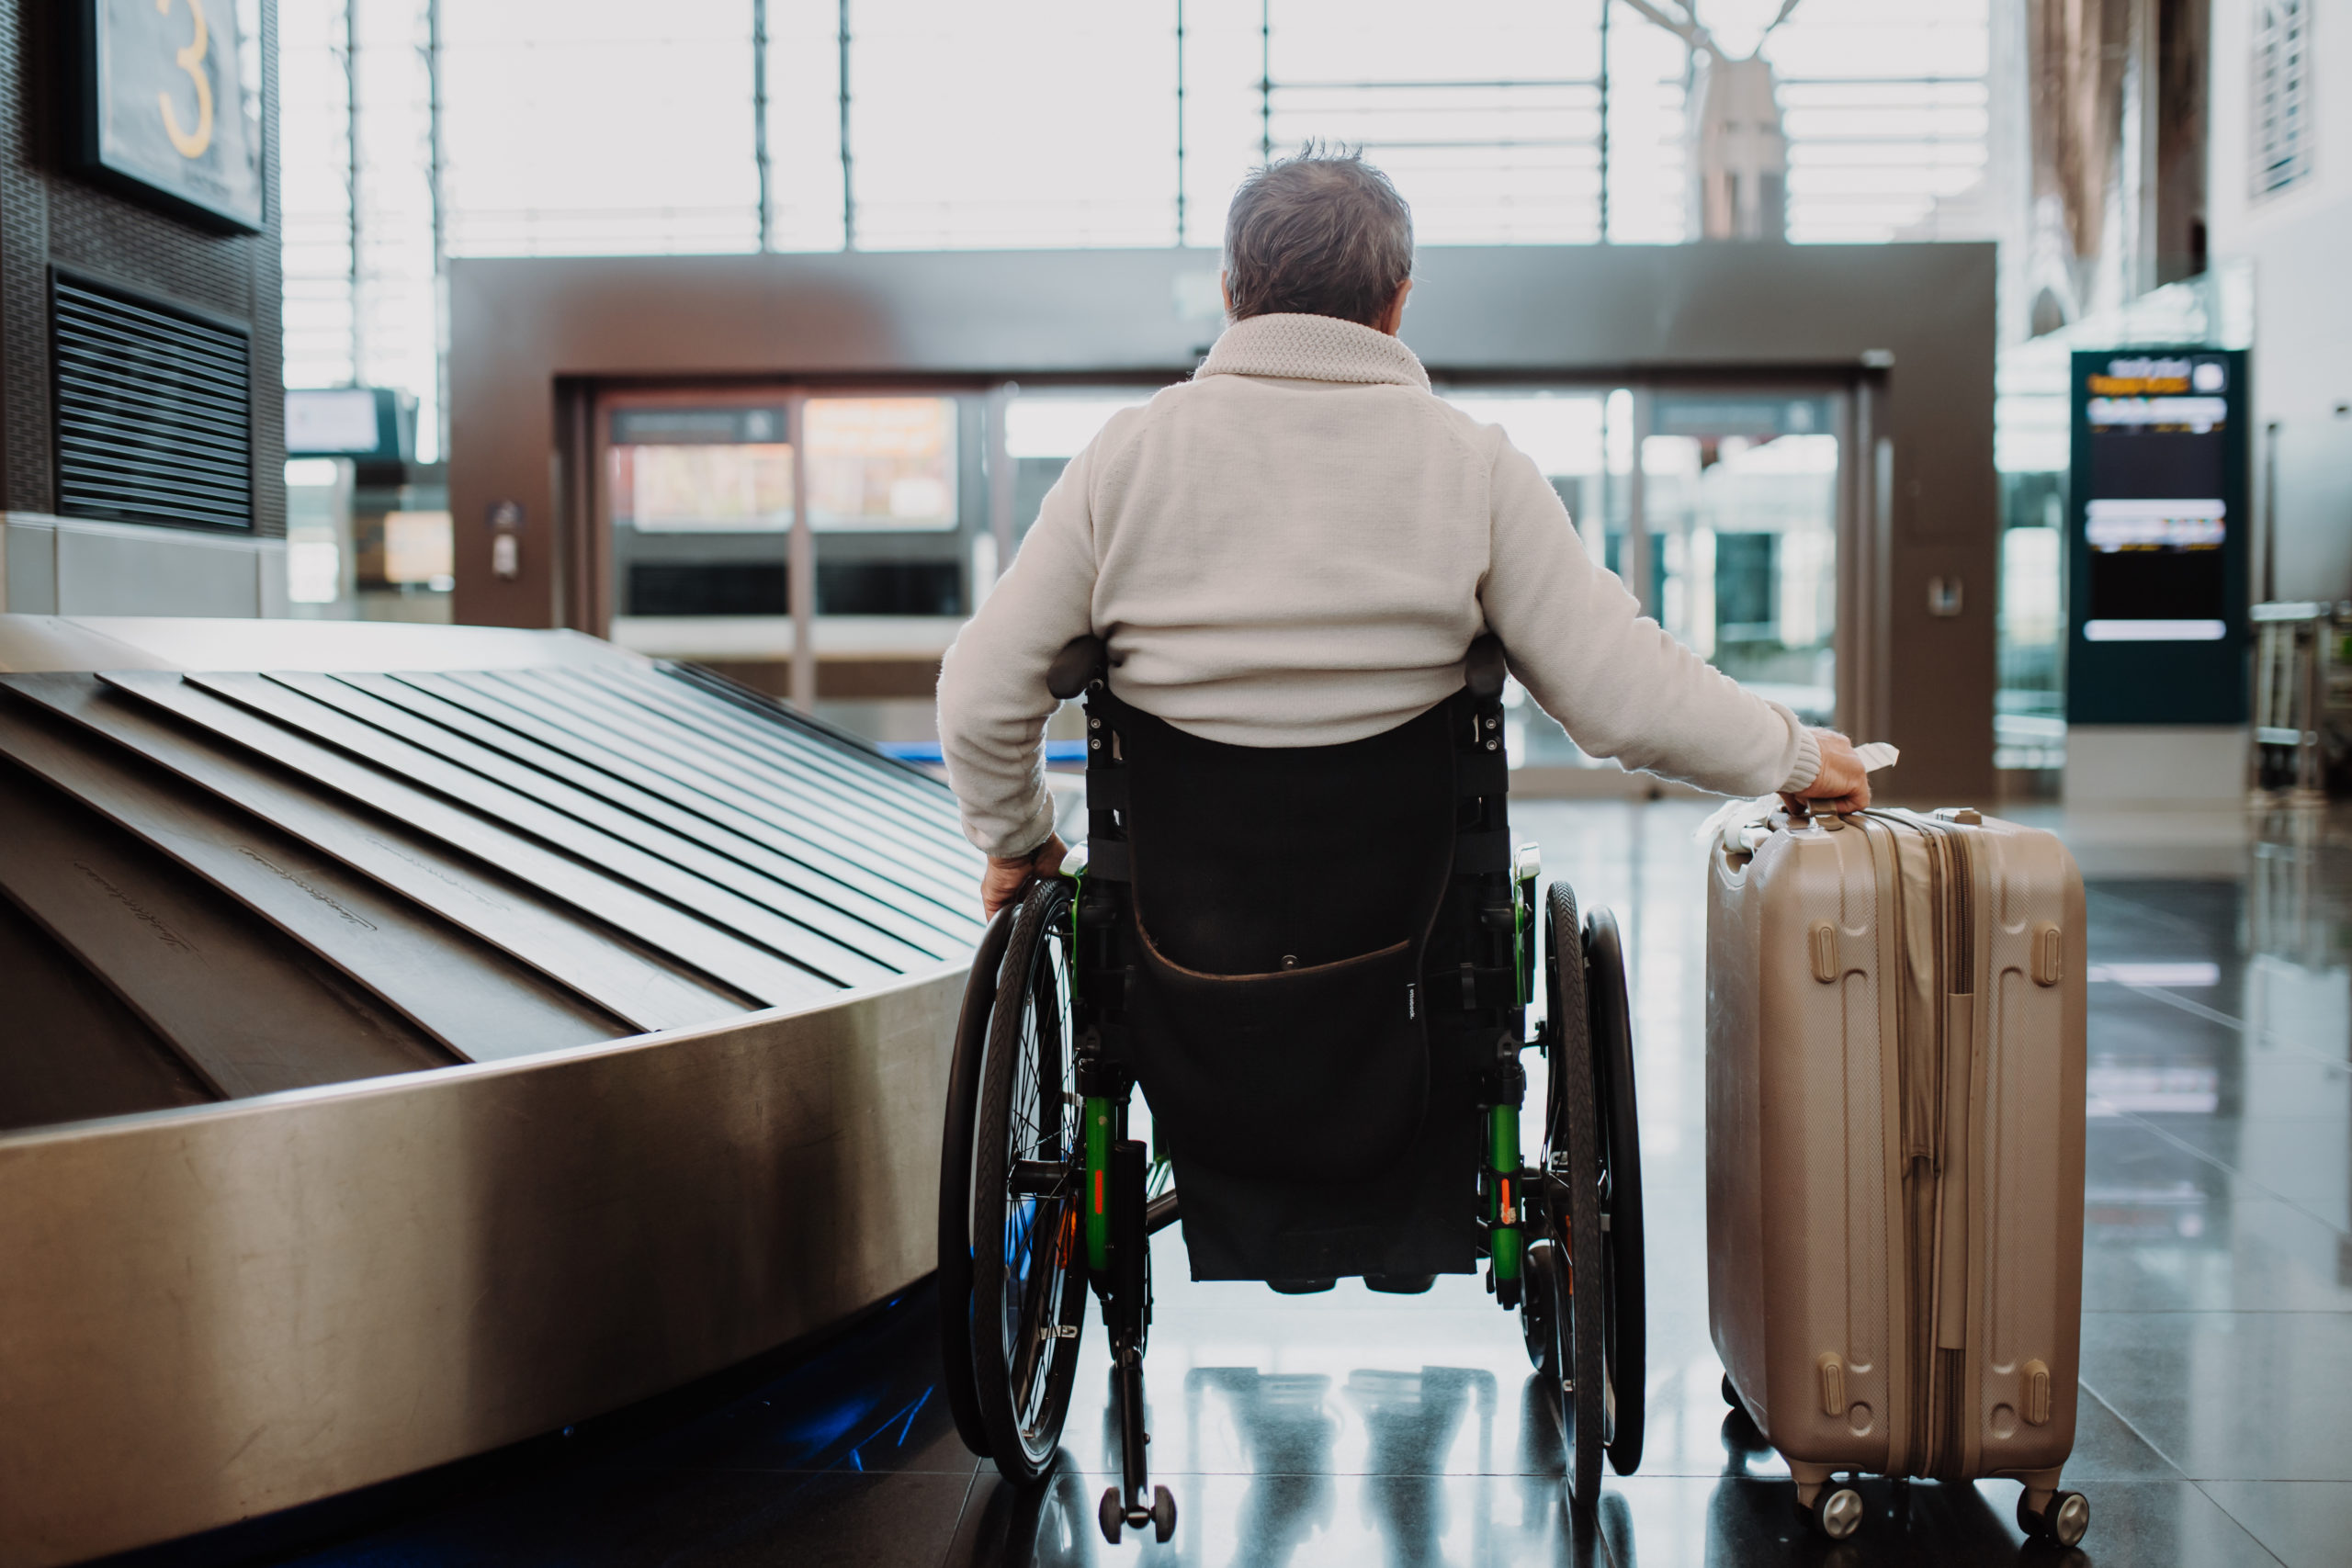 Rear view of a man on wheelchair at airport with his luggage.